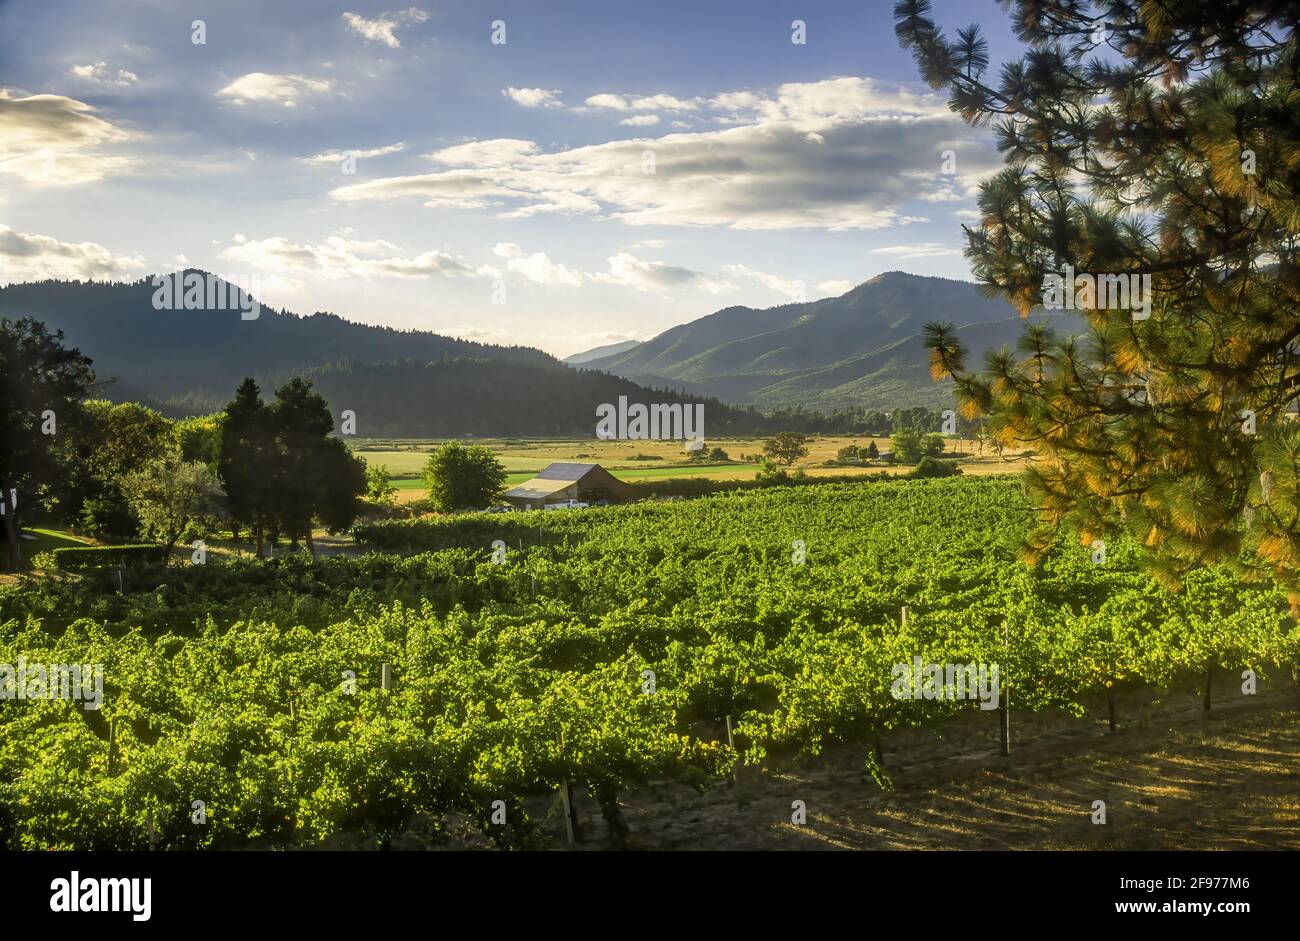 Valley View Winery in the Applegate Valley AVA of southwestern Oregon. Stock Photo